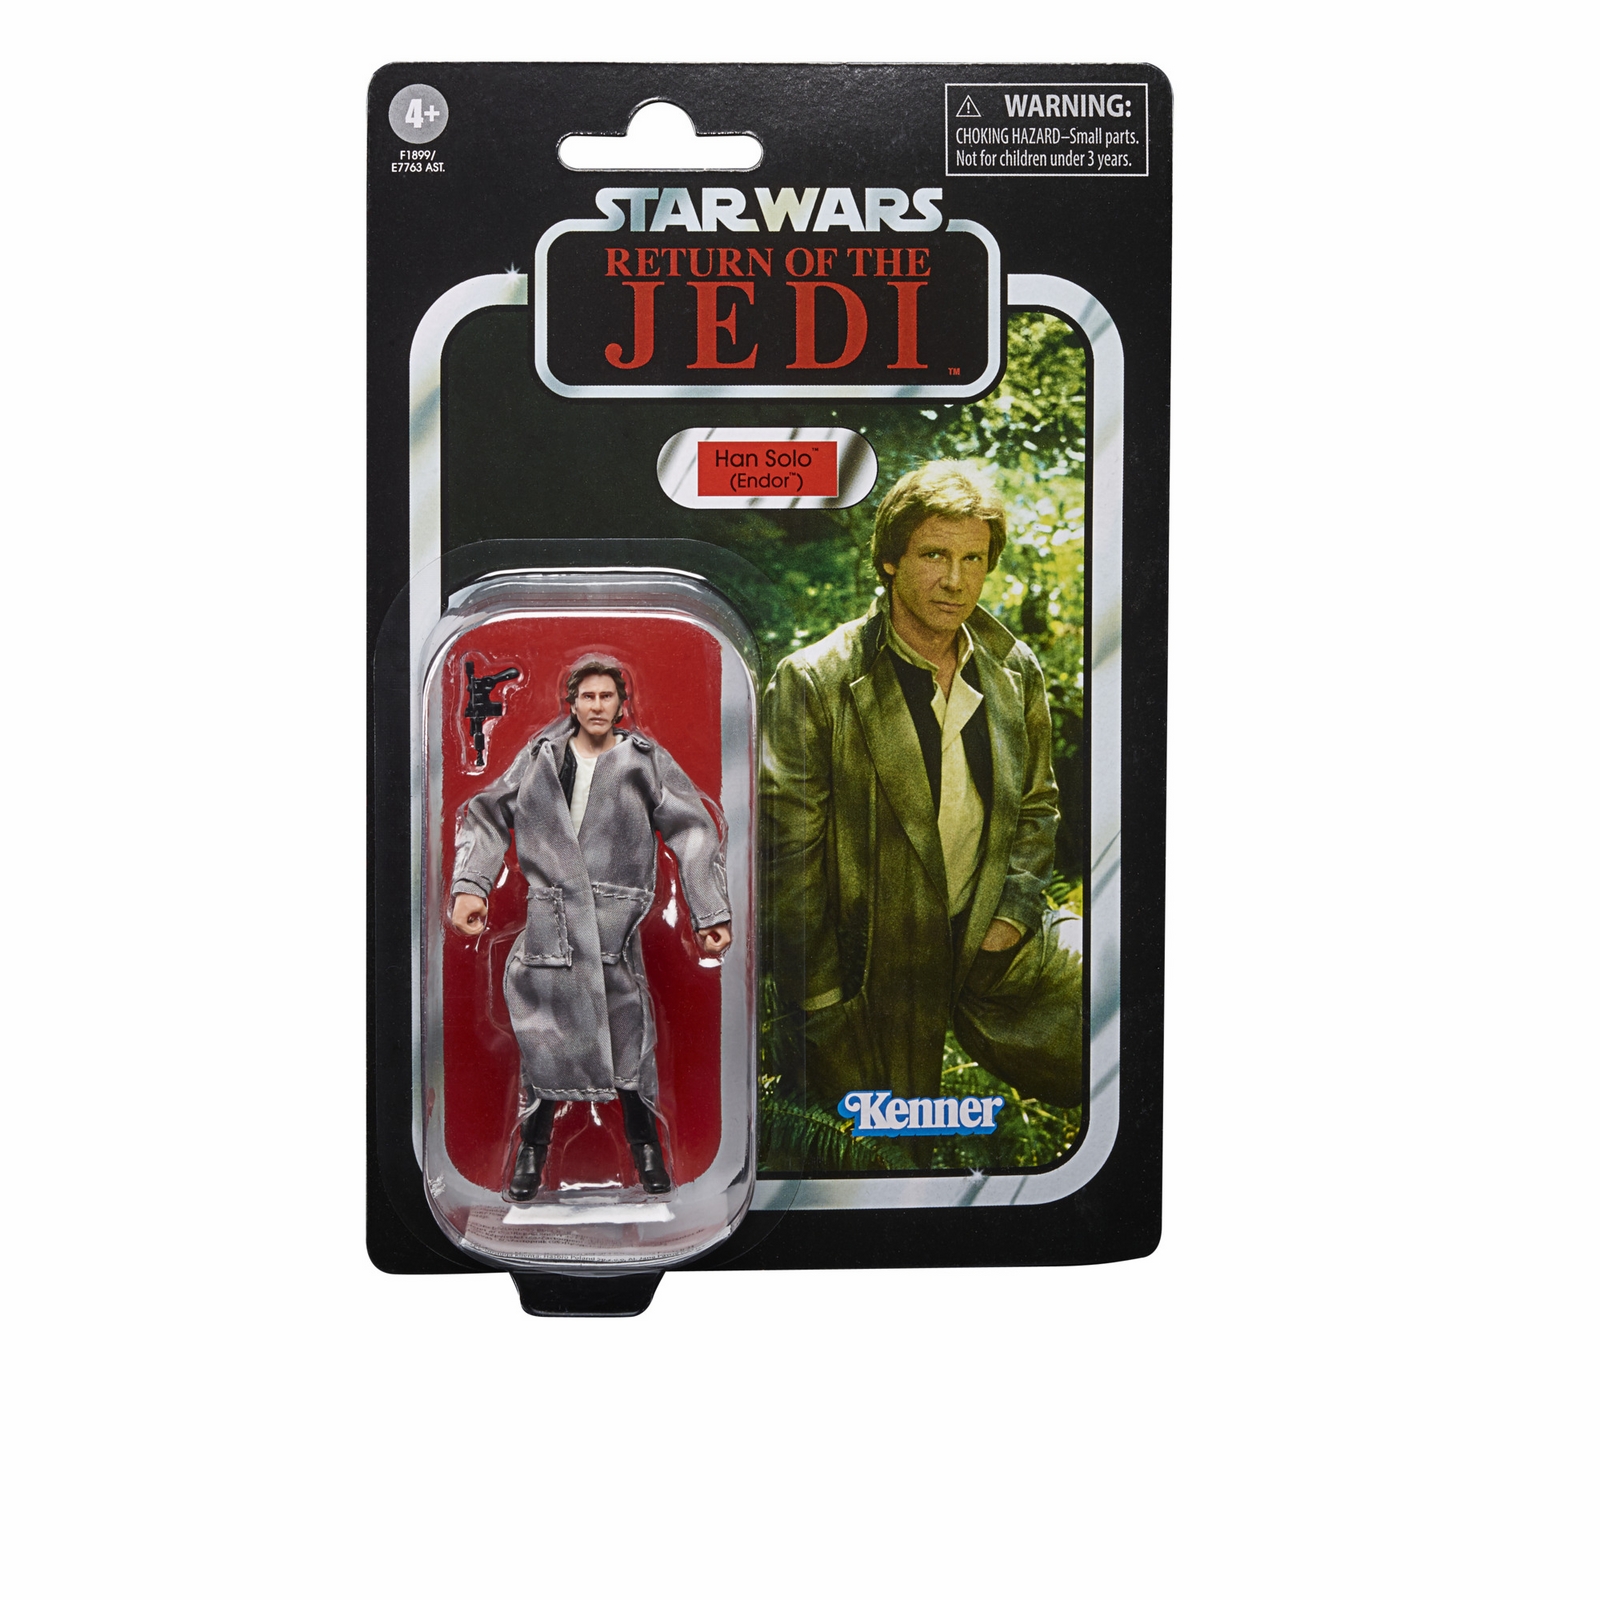 STAR WARS THE VINTAGE COLLECTION 3.75-INCH HAN SOLO (ENDOR) Figure - in pck (2).jpg